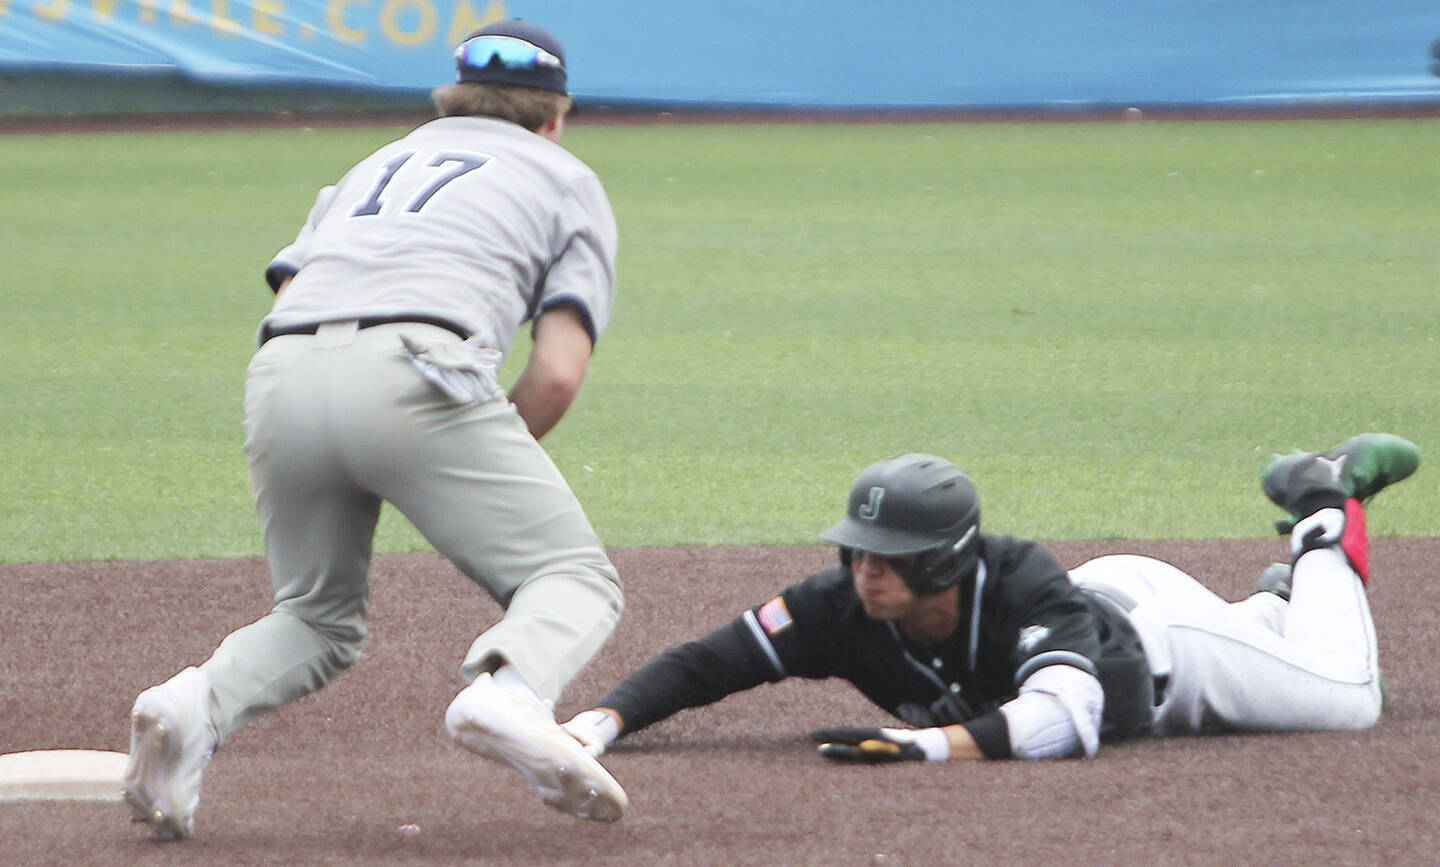 Joey Hildebrandt (17) gets set to tag Jackson’s Dominic Hellman, but he slid in safely for a stolen base.